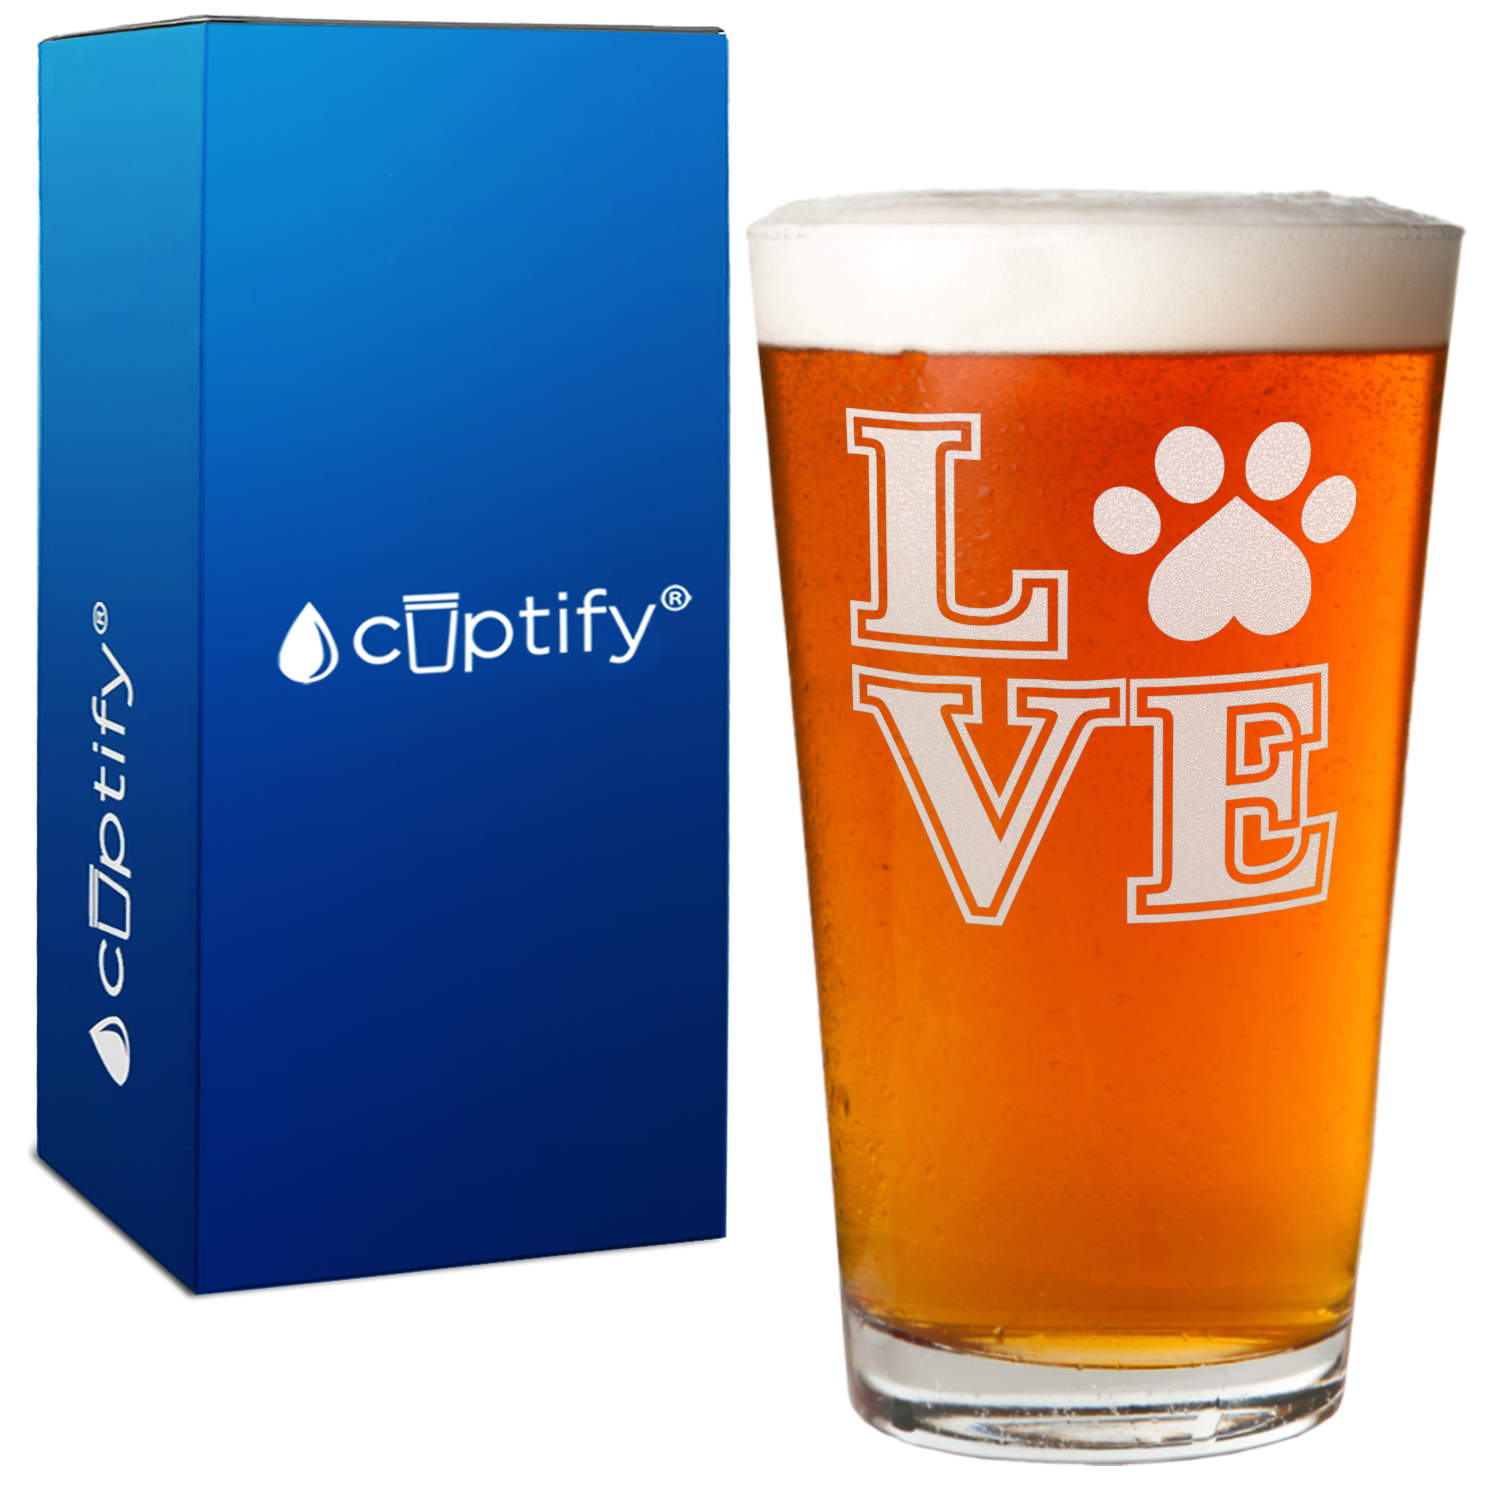 Love Dogs Paw Print Beer Pint Glass